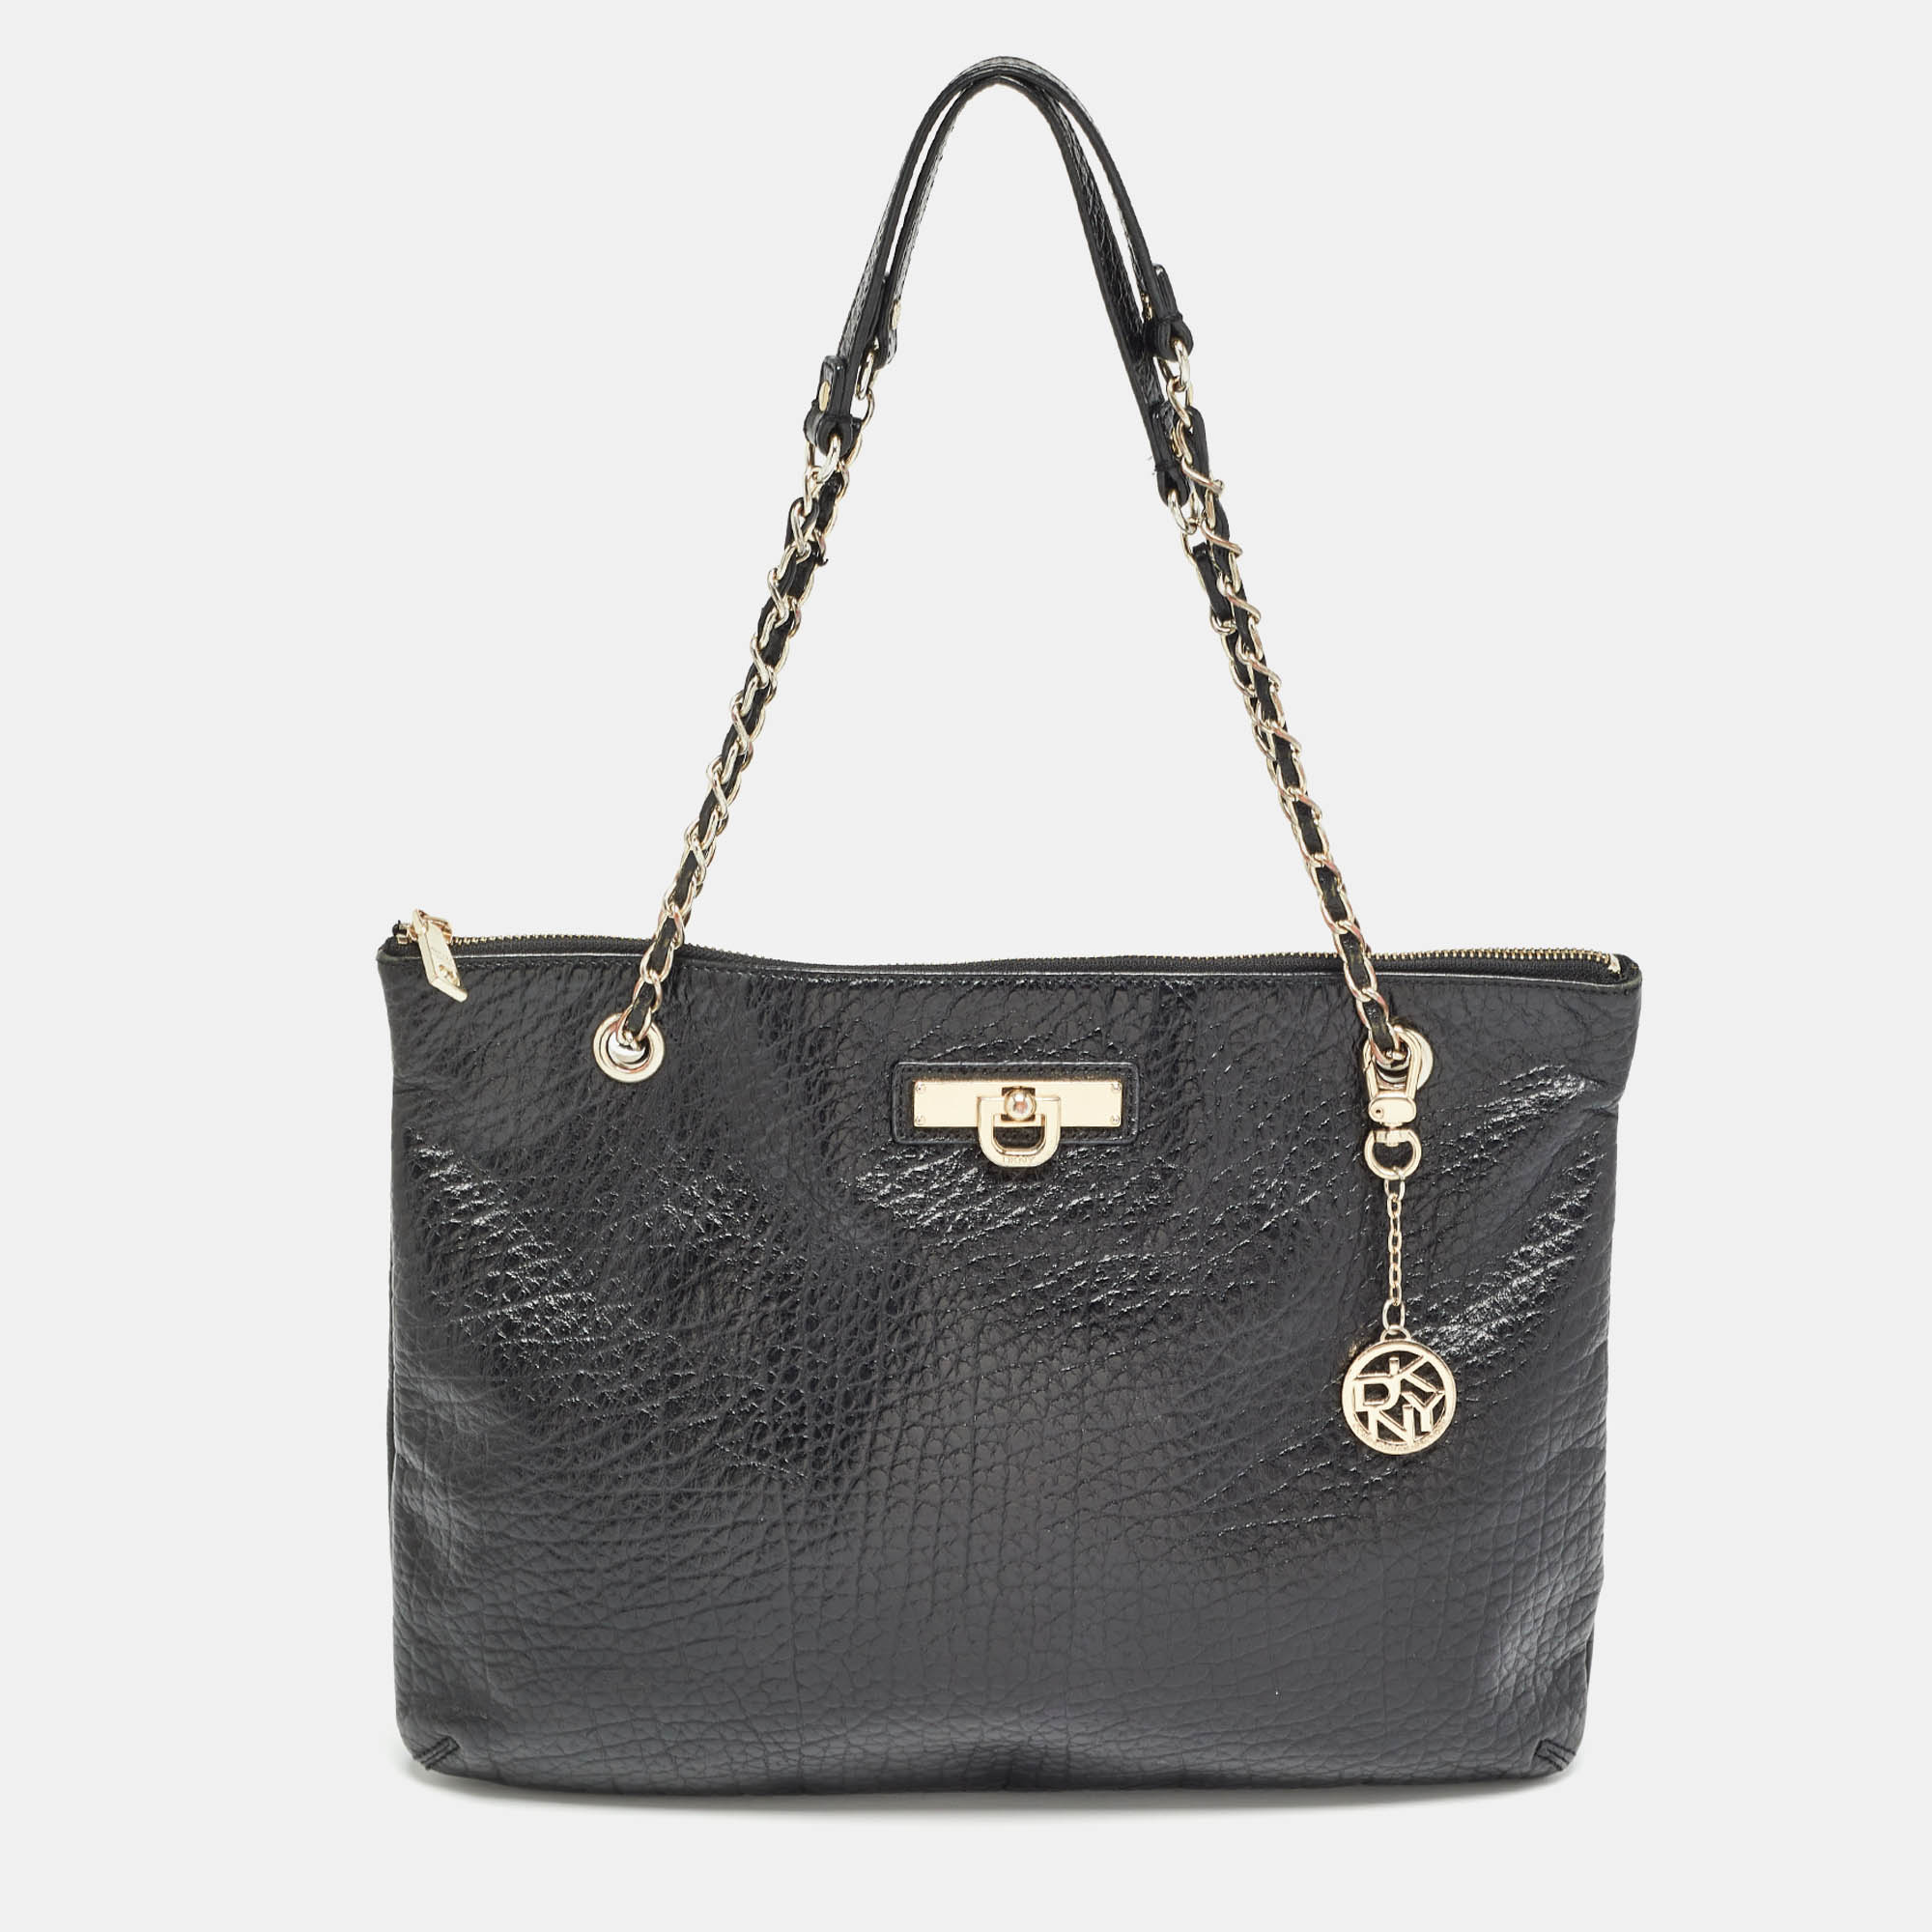 Pre-owned Dkny Black Leather Charm Chain Tote